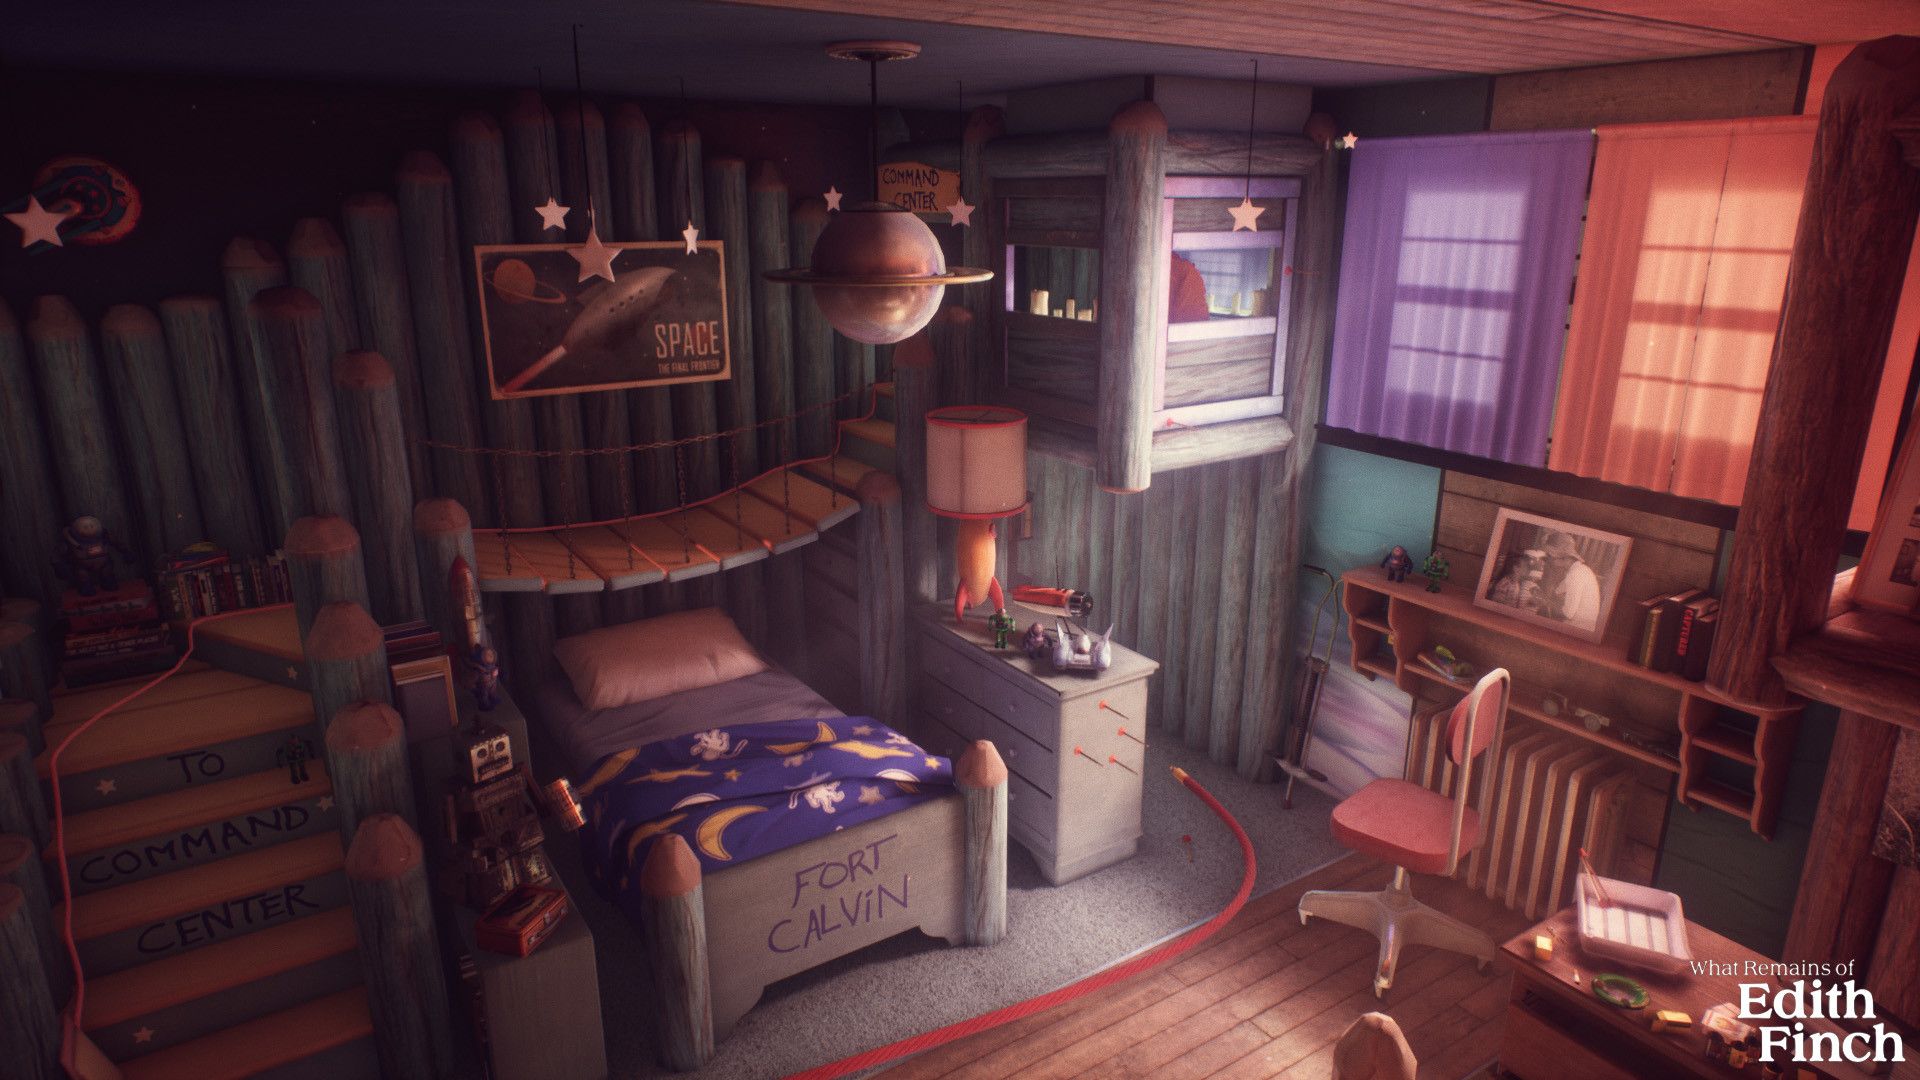 Walking Simulator What Remains of Edith Finch